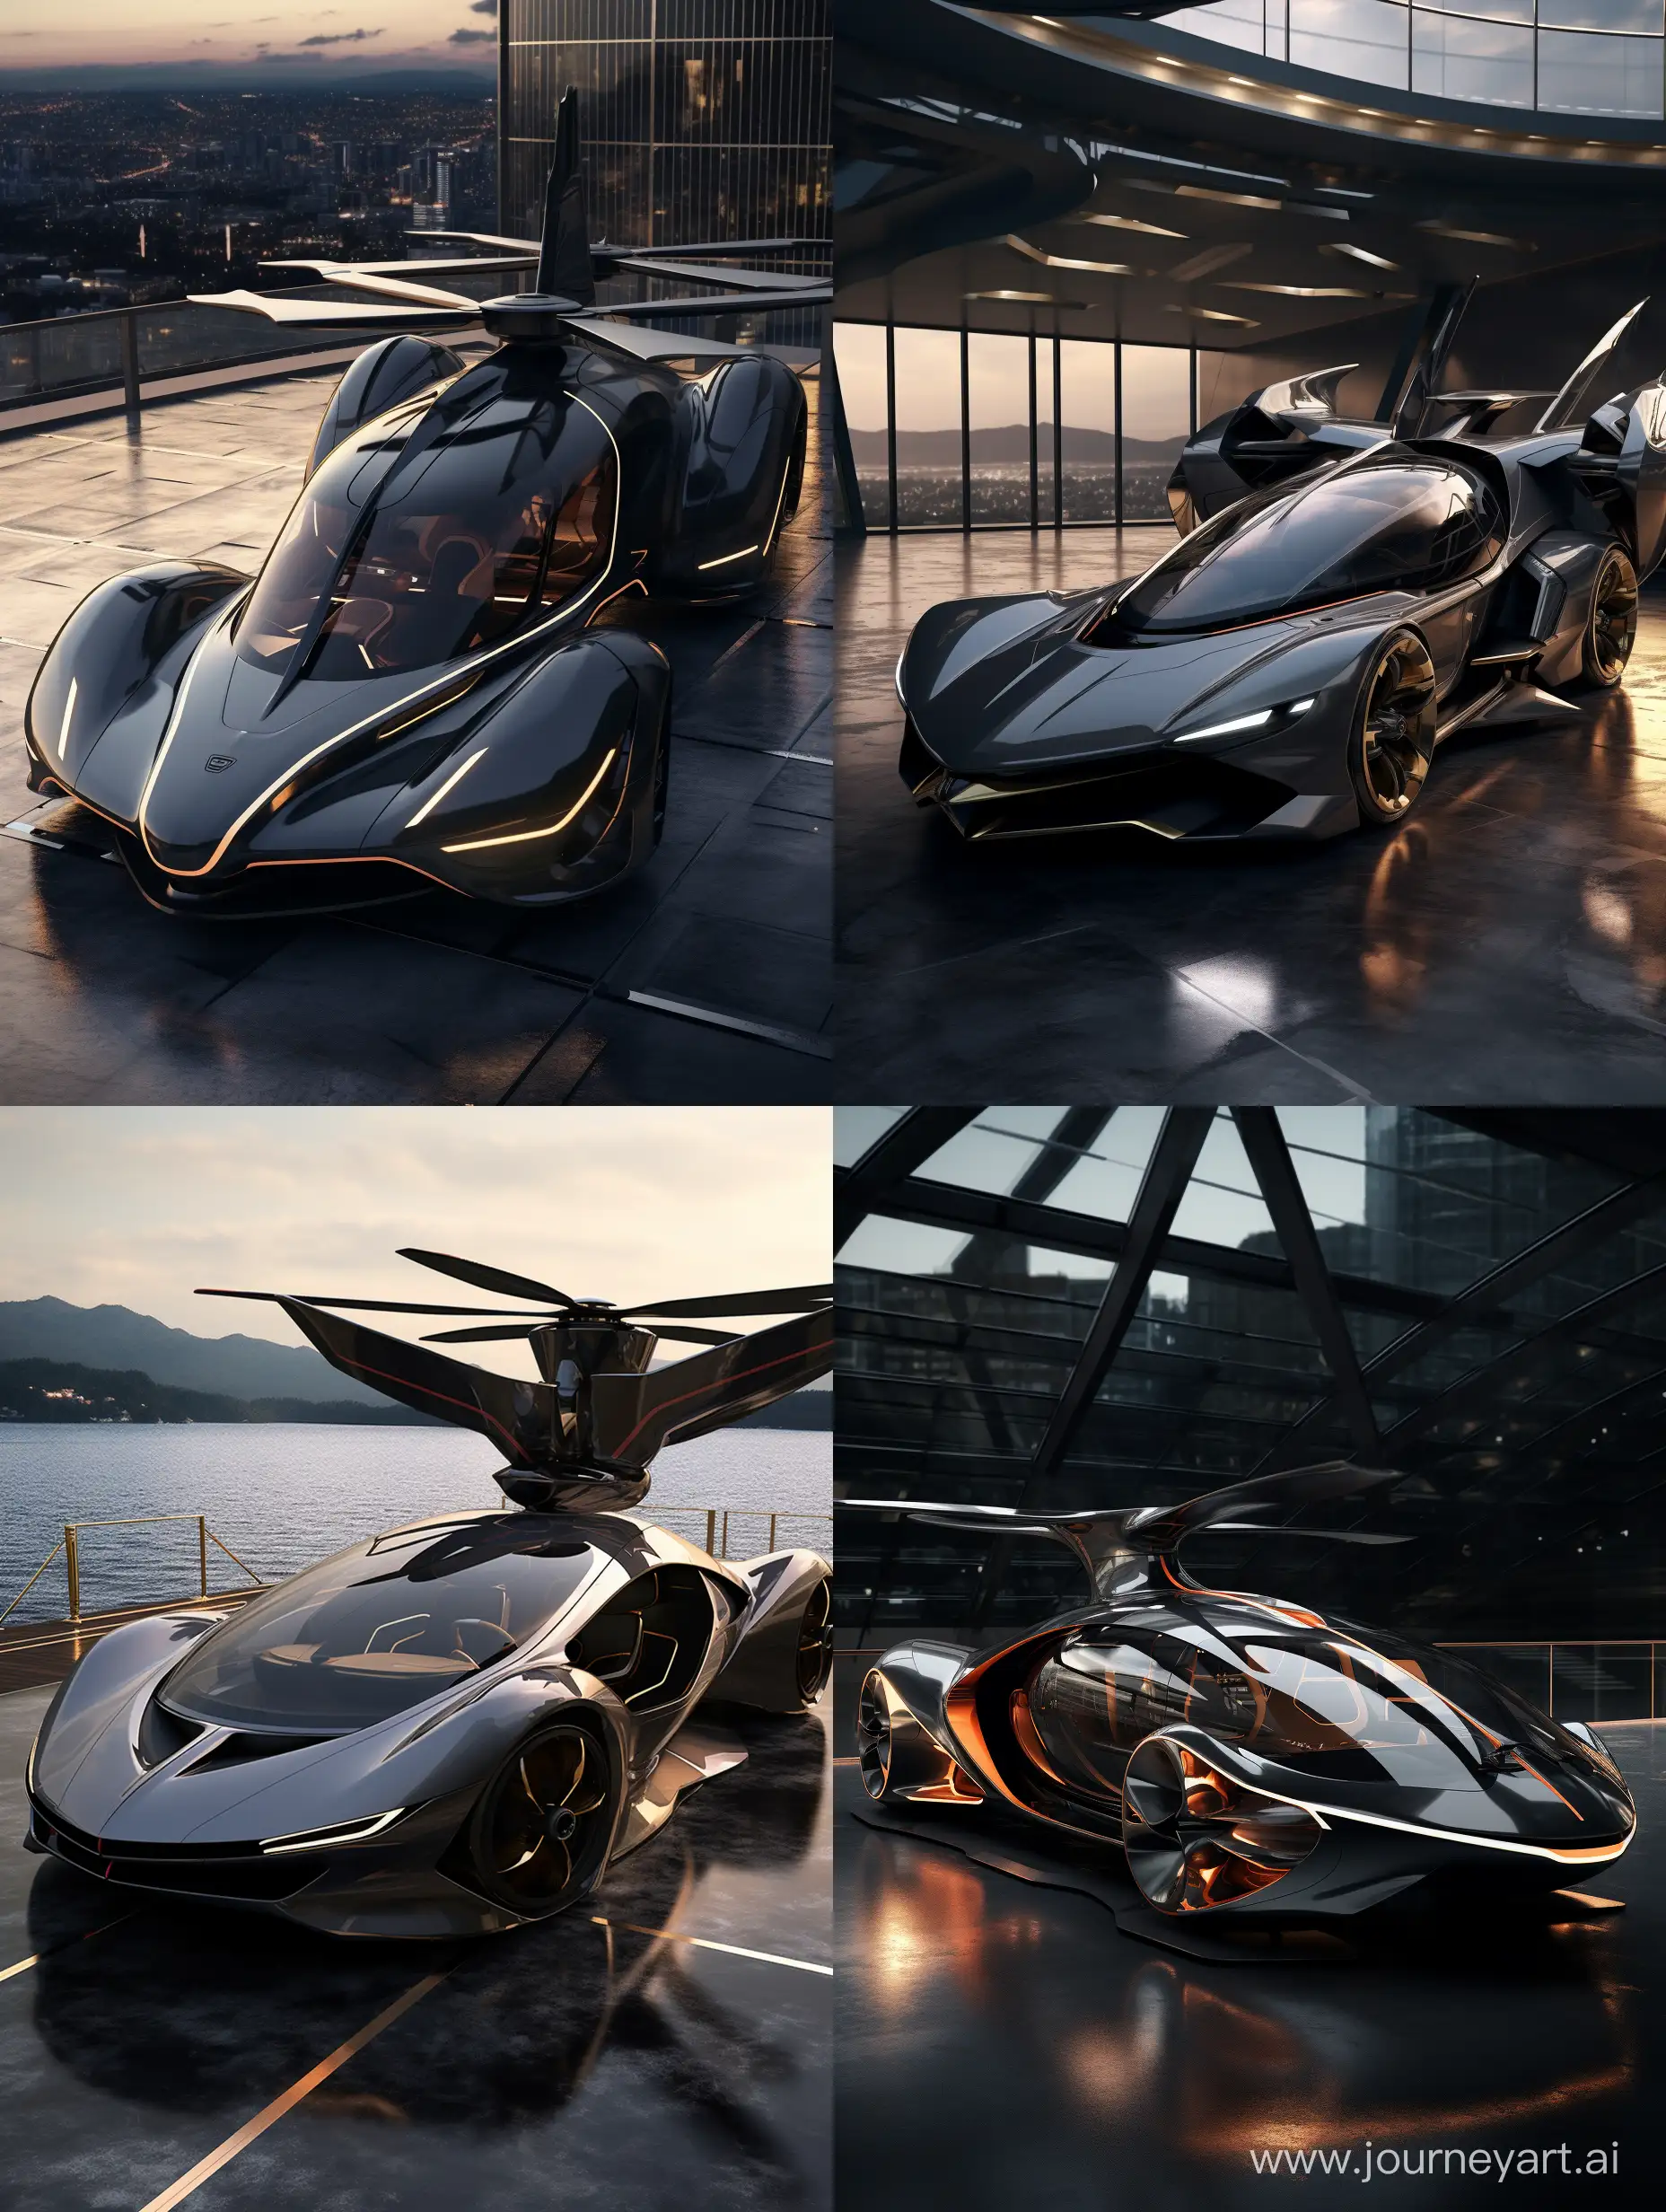 Experience the epitome of luxury in the skies with our futuristic Lamborghini helicopter concepts from stylish exteriors to innovative designs these airborns Marvel's redefine opulence